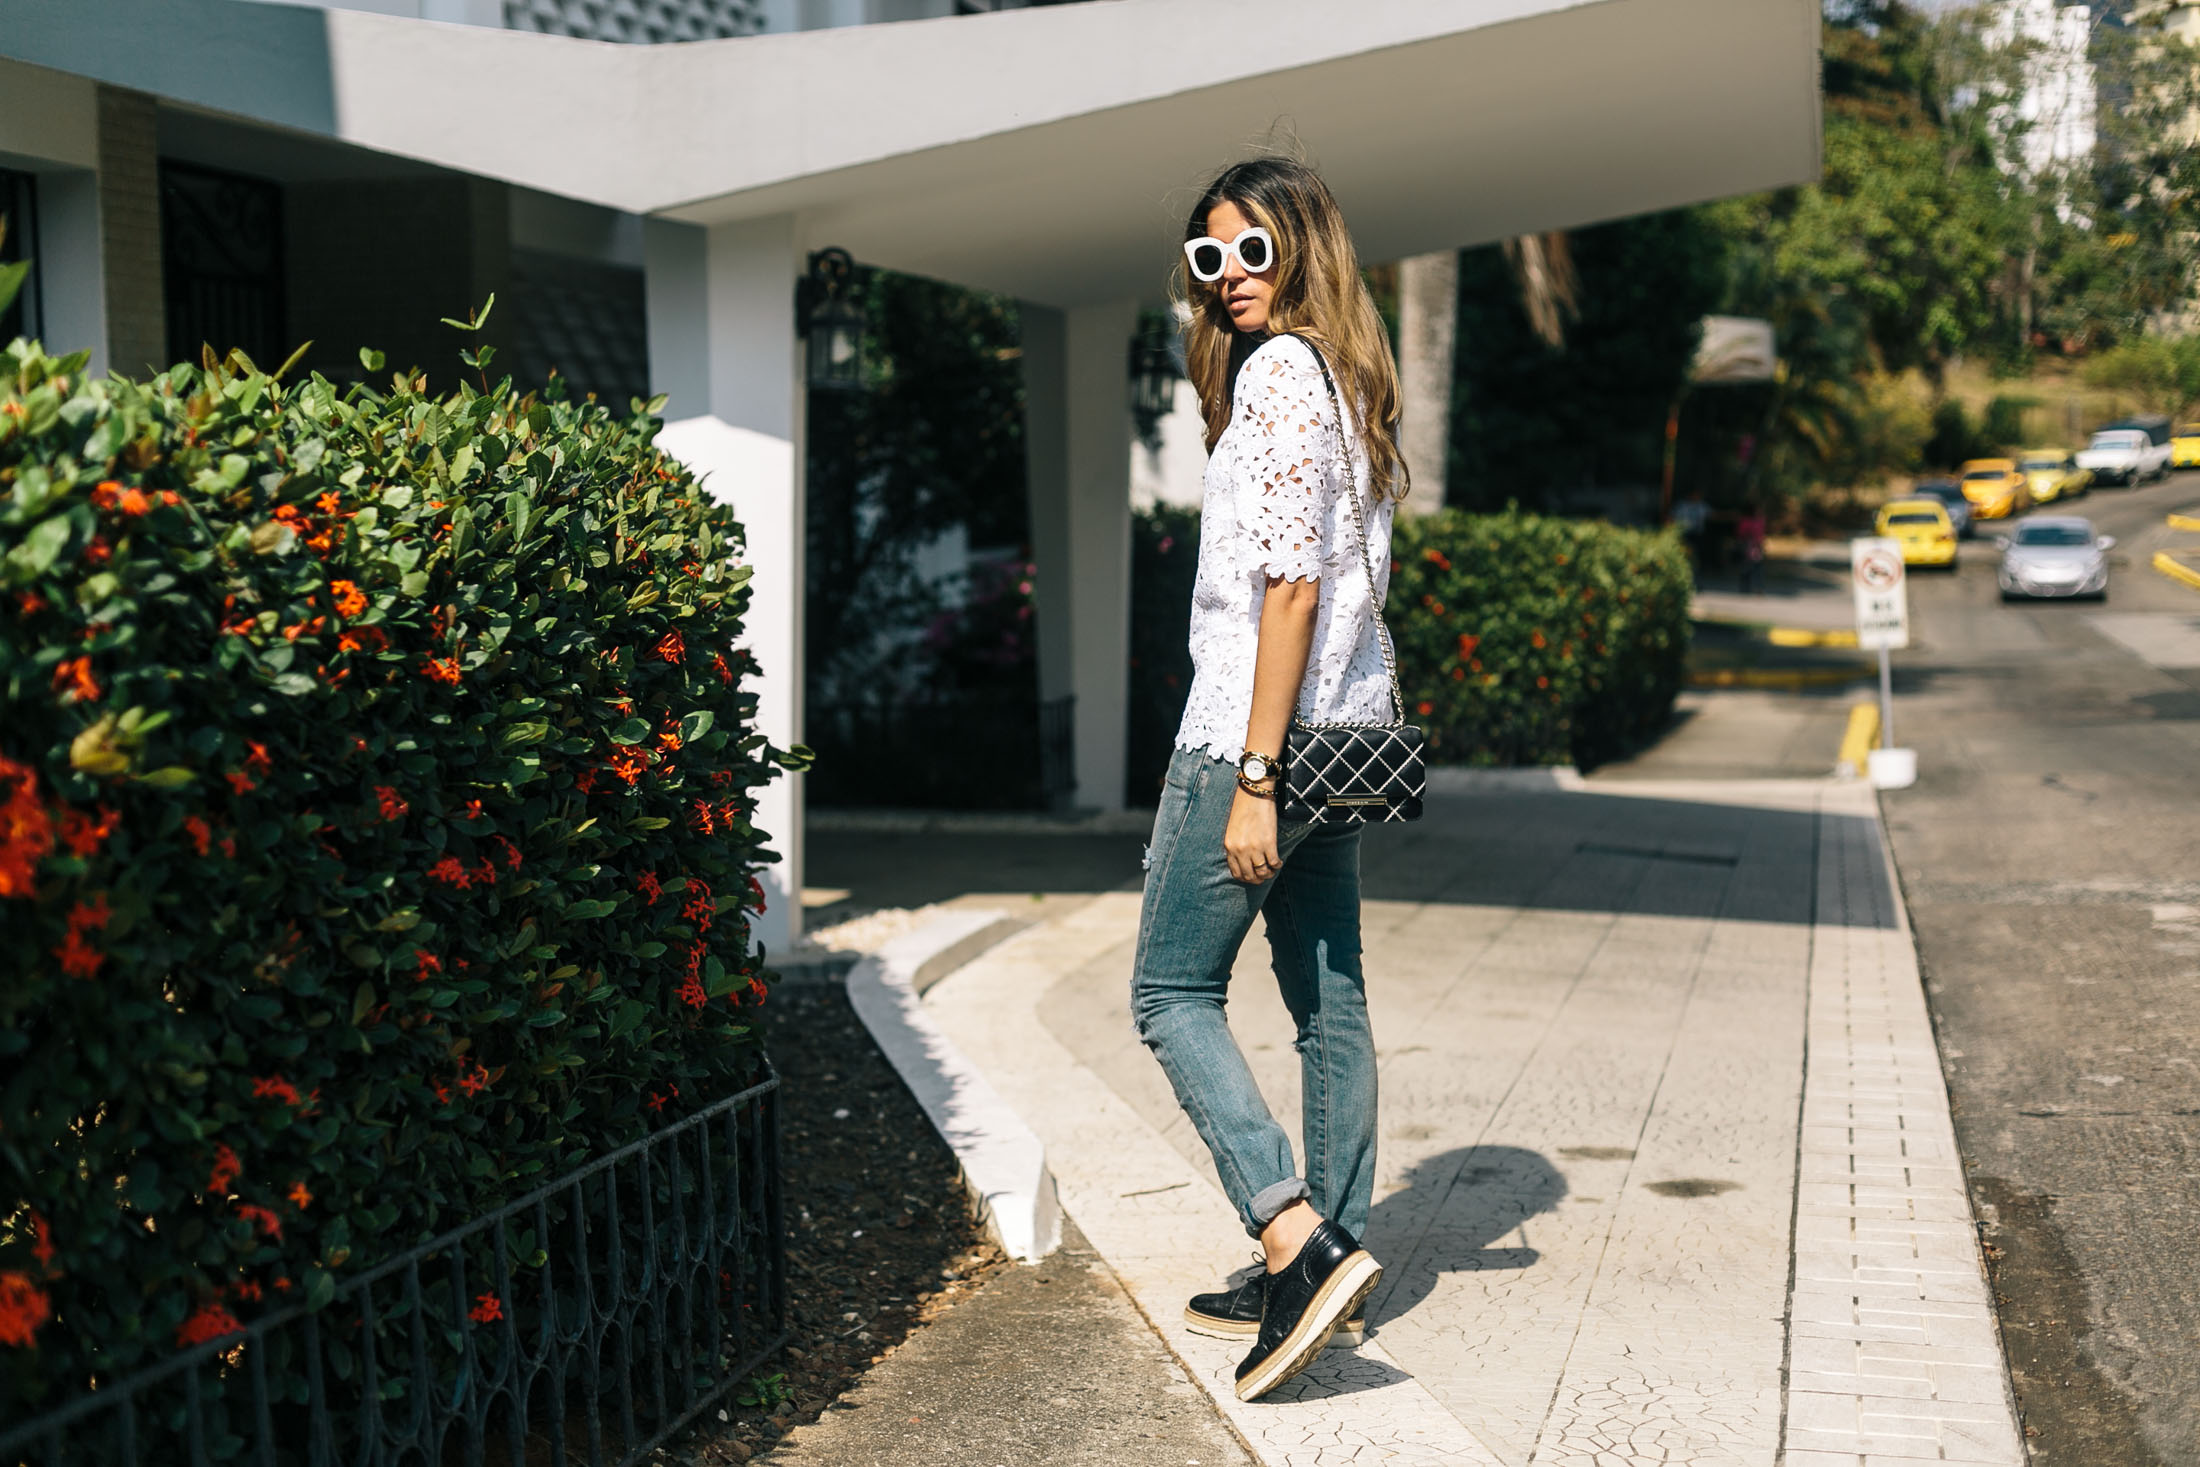 Casual spring or summer jeans outfit idea by blogger Maristella Gonzalez